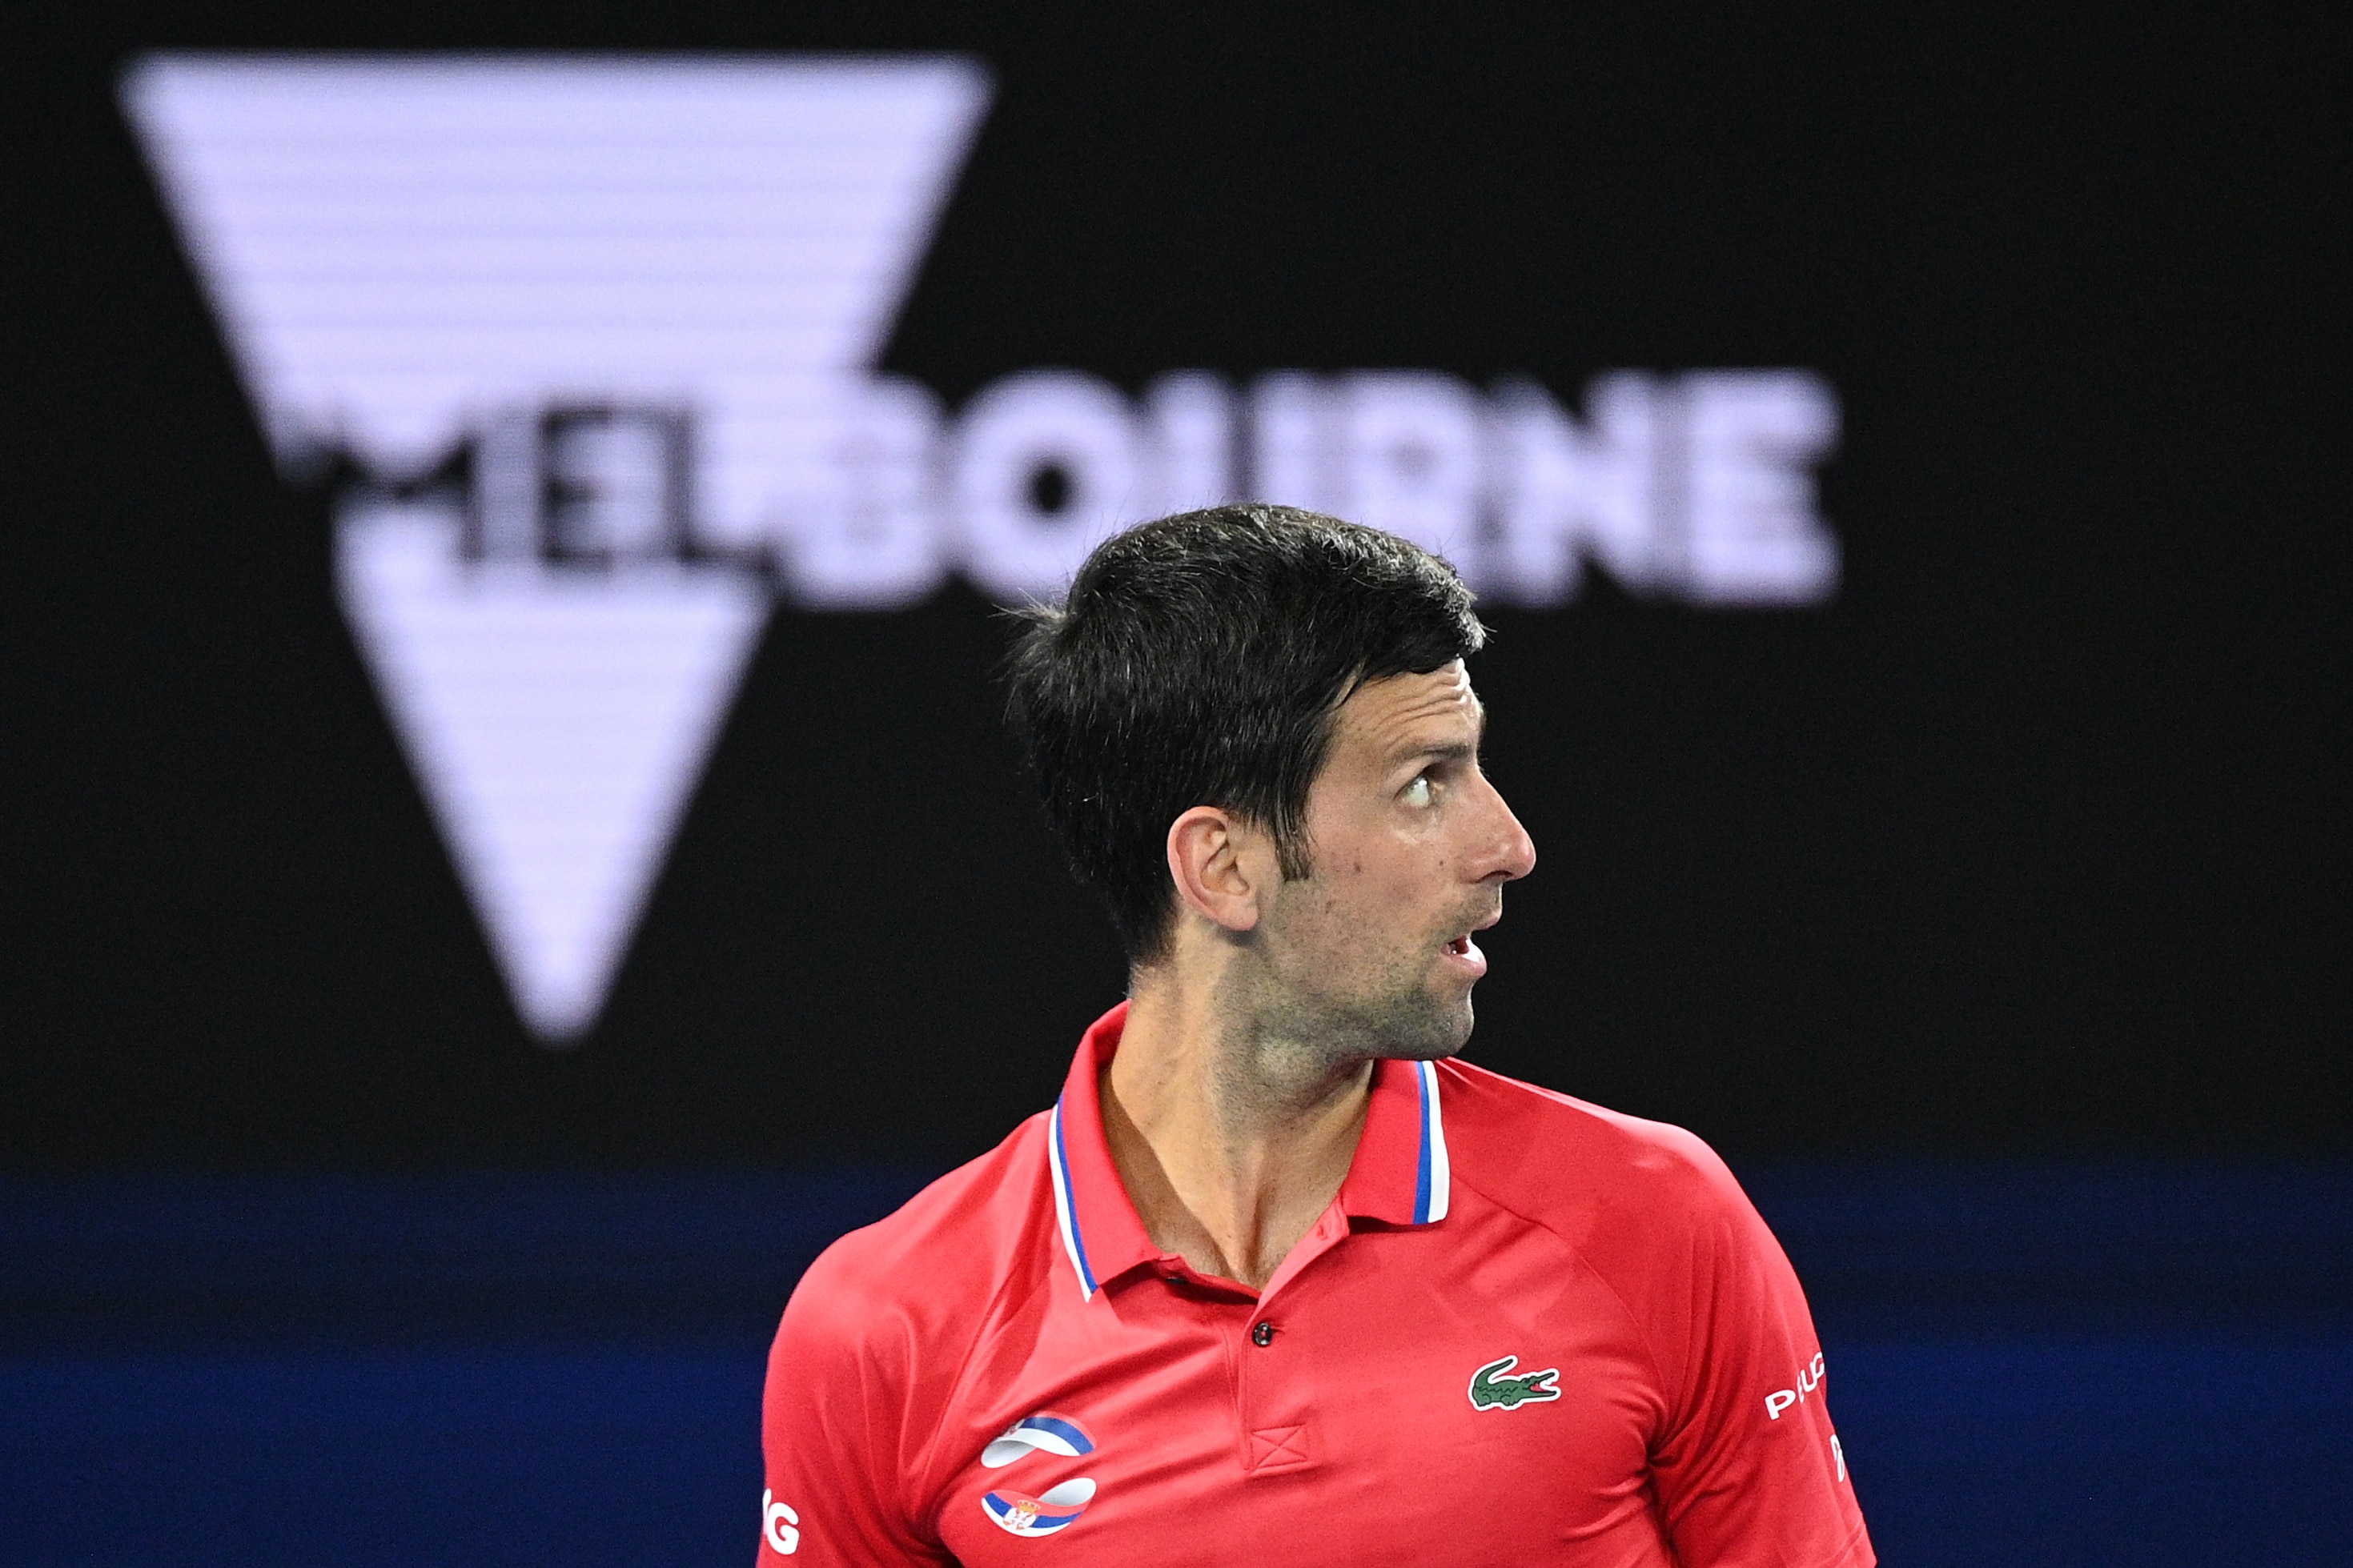 Novak Djokovic of Serbia reacts during the ATP Cup against Alexander Zverev of Germany at Melbourne Park in Melbourne, Friday, February 5, 2021. (AAP Image/Dean Lewins) NO ARCHIVING, EDITORIAL USE ONLY